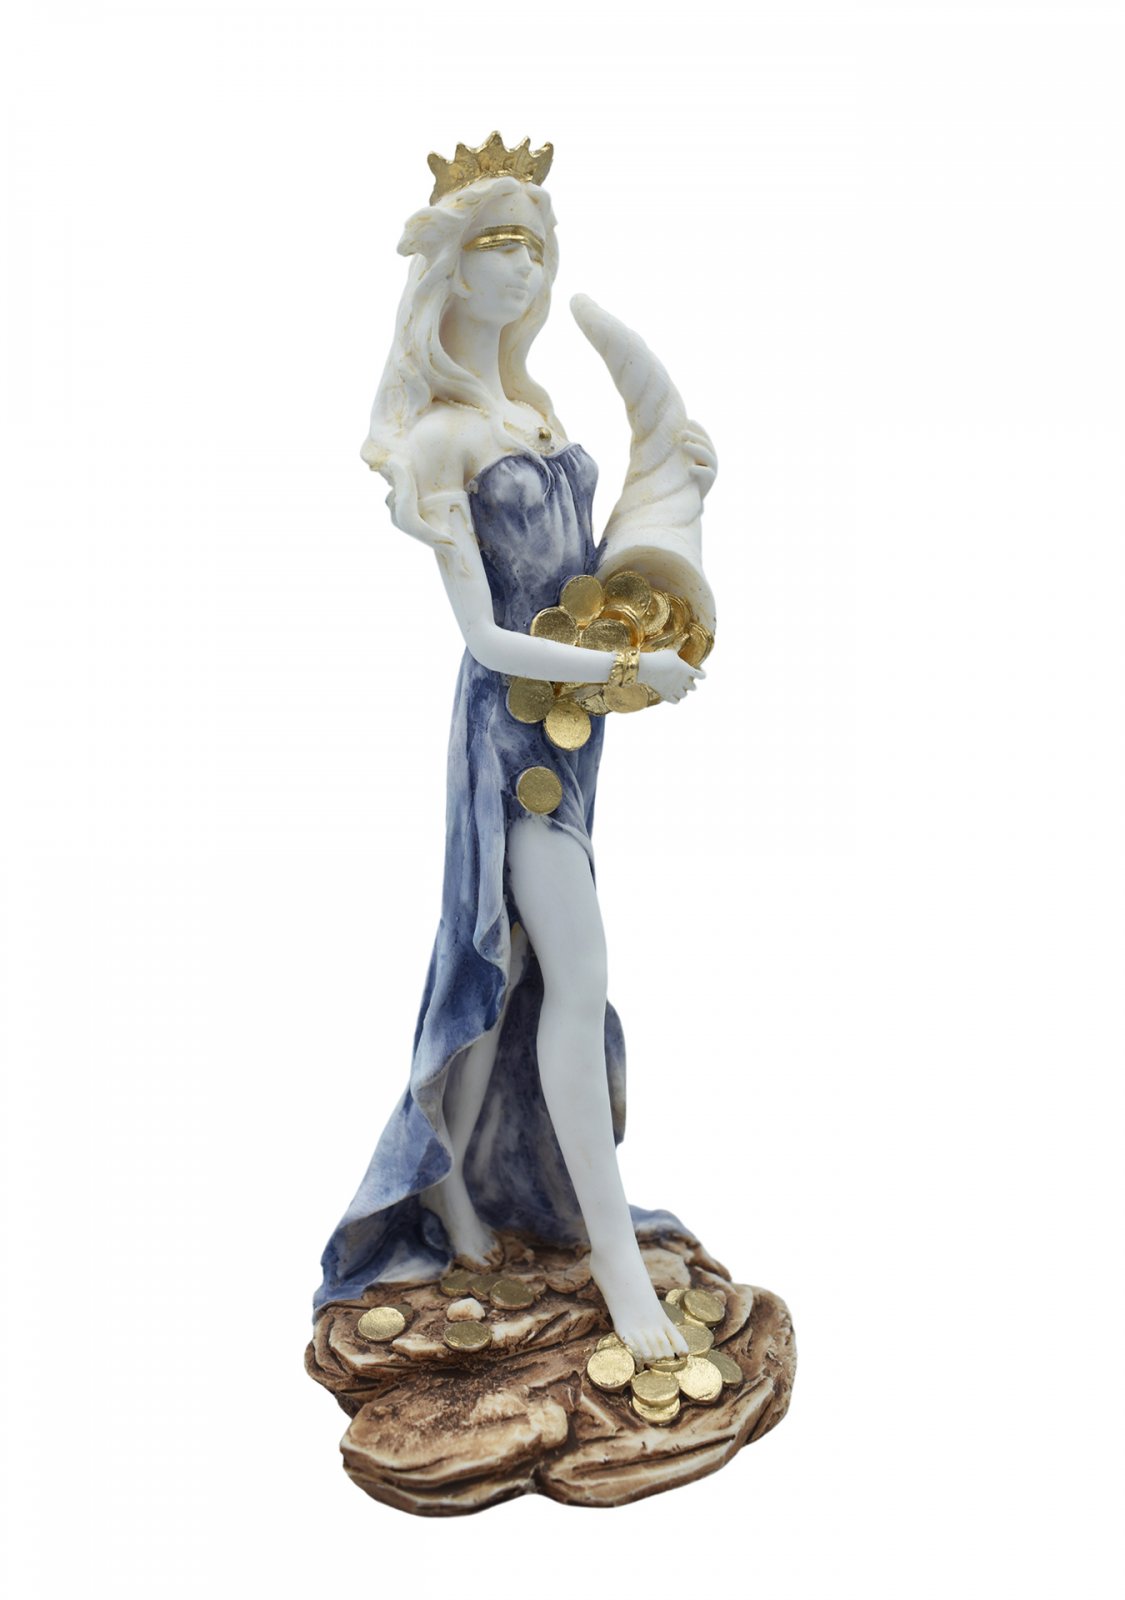 Tyche, Fortuna, the goddess of fortune, greek alabaster statue with color